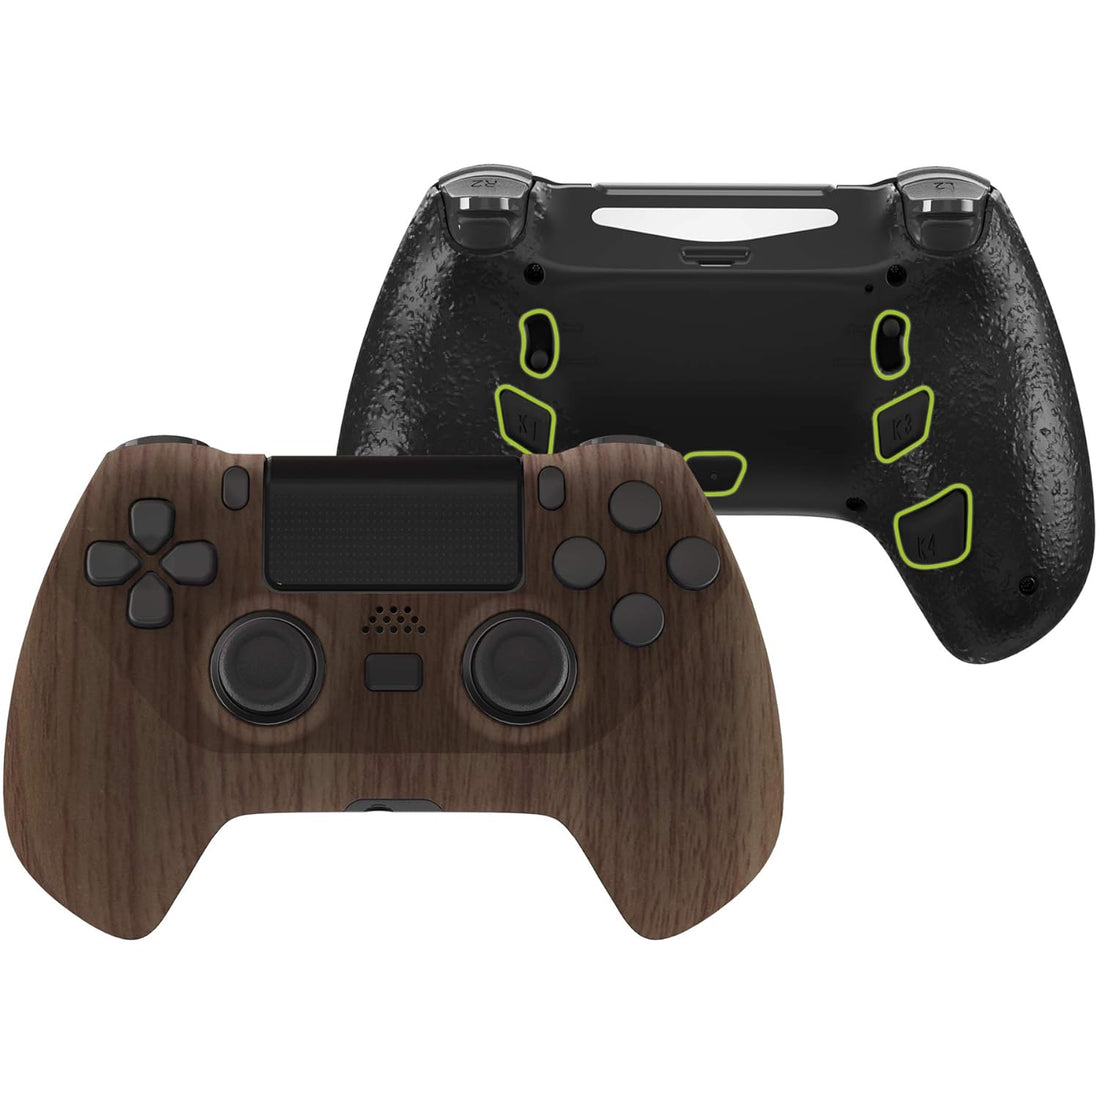 eXtremeRate Wood Grain Decade Tournament Controller (DTC) Upgrade Kit for PS4 Controller JDM-040/050/055, Upgrade Board & Ergonomic Shell & Back Buttons & Trigger Stops - Controller NOT Included